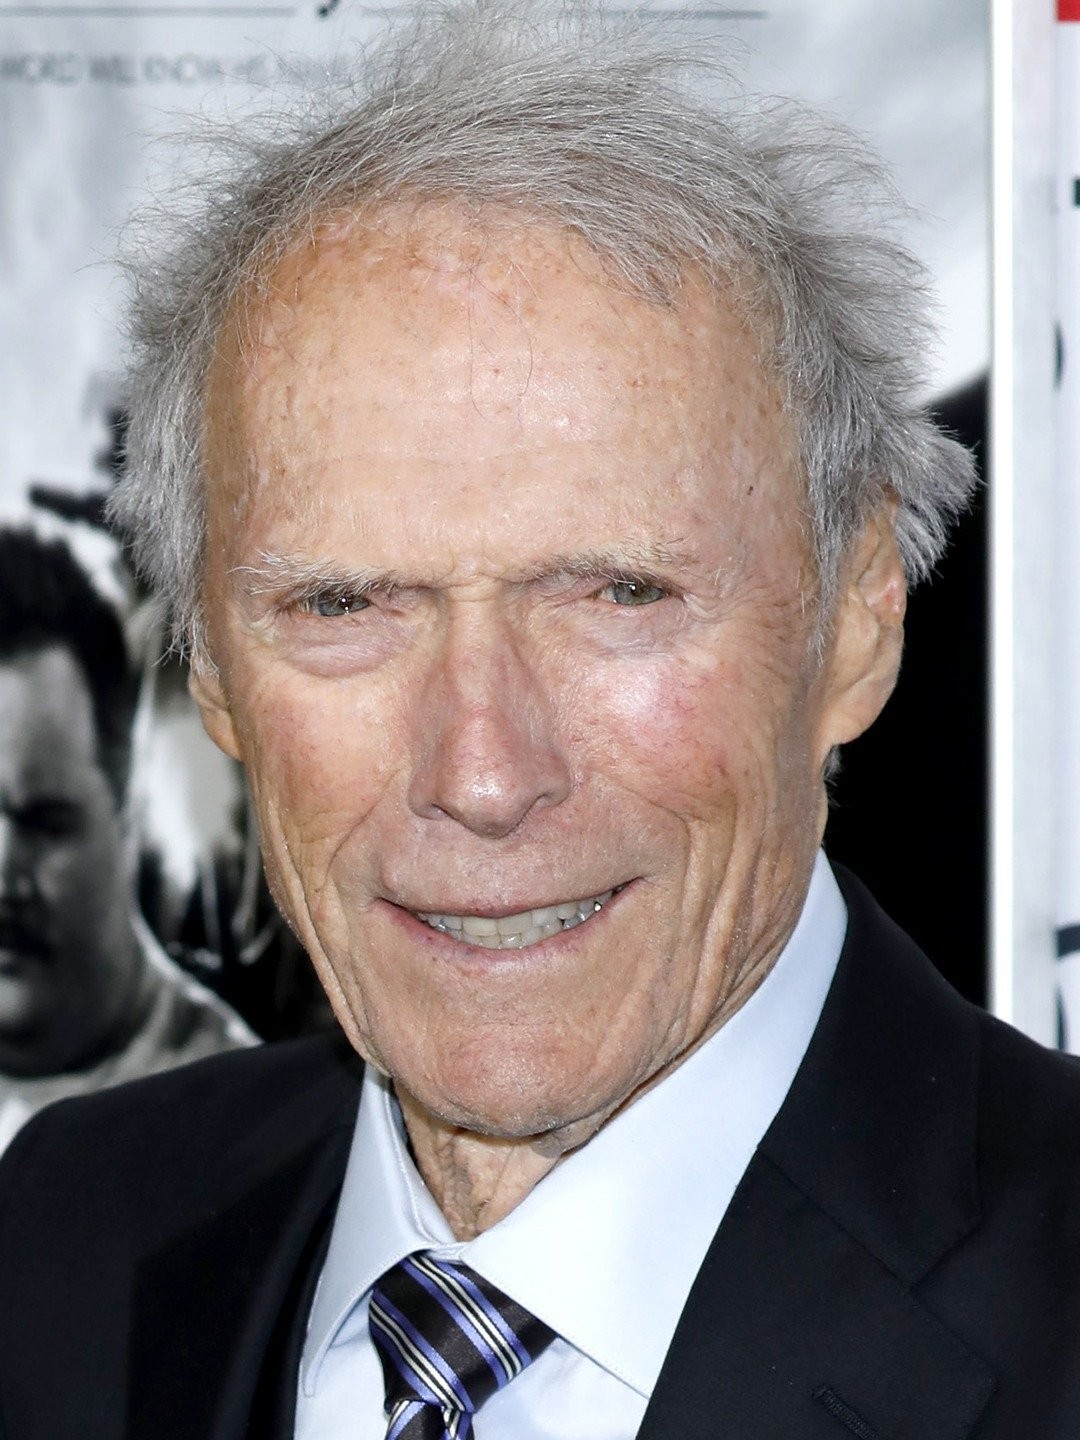 Clint Eastwood being still alive